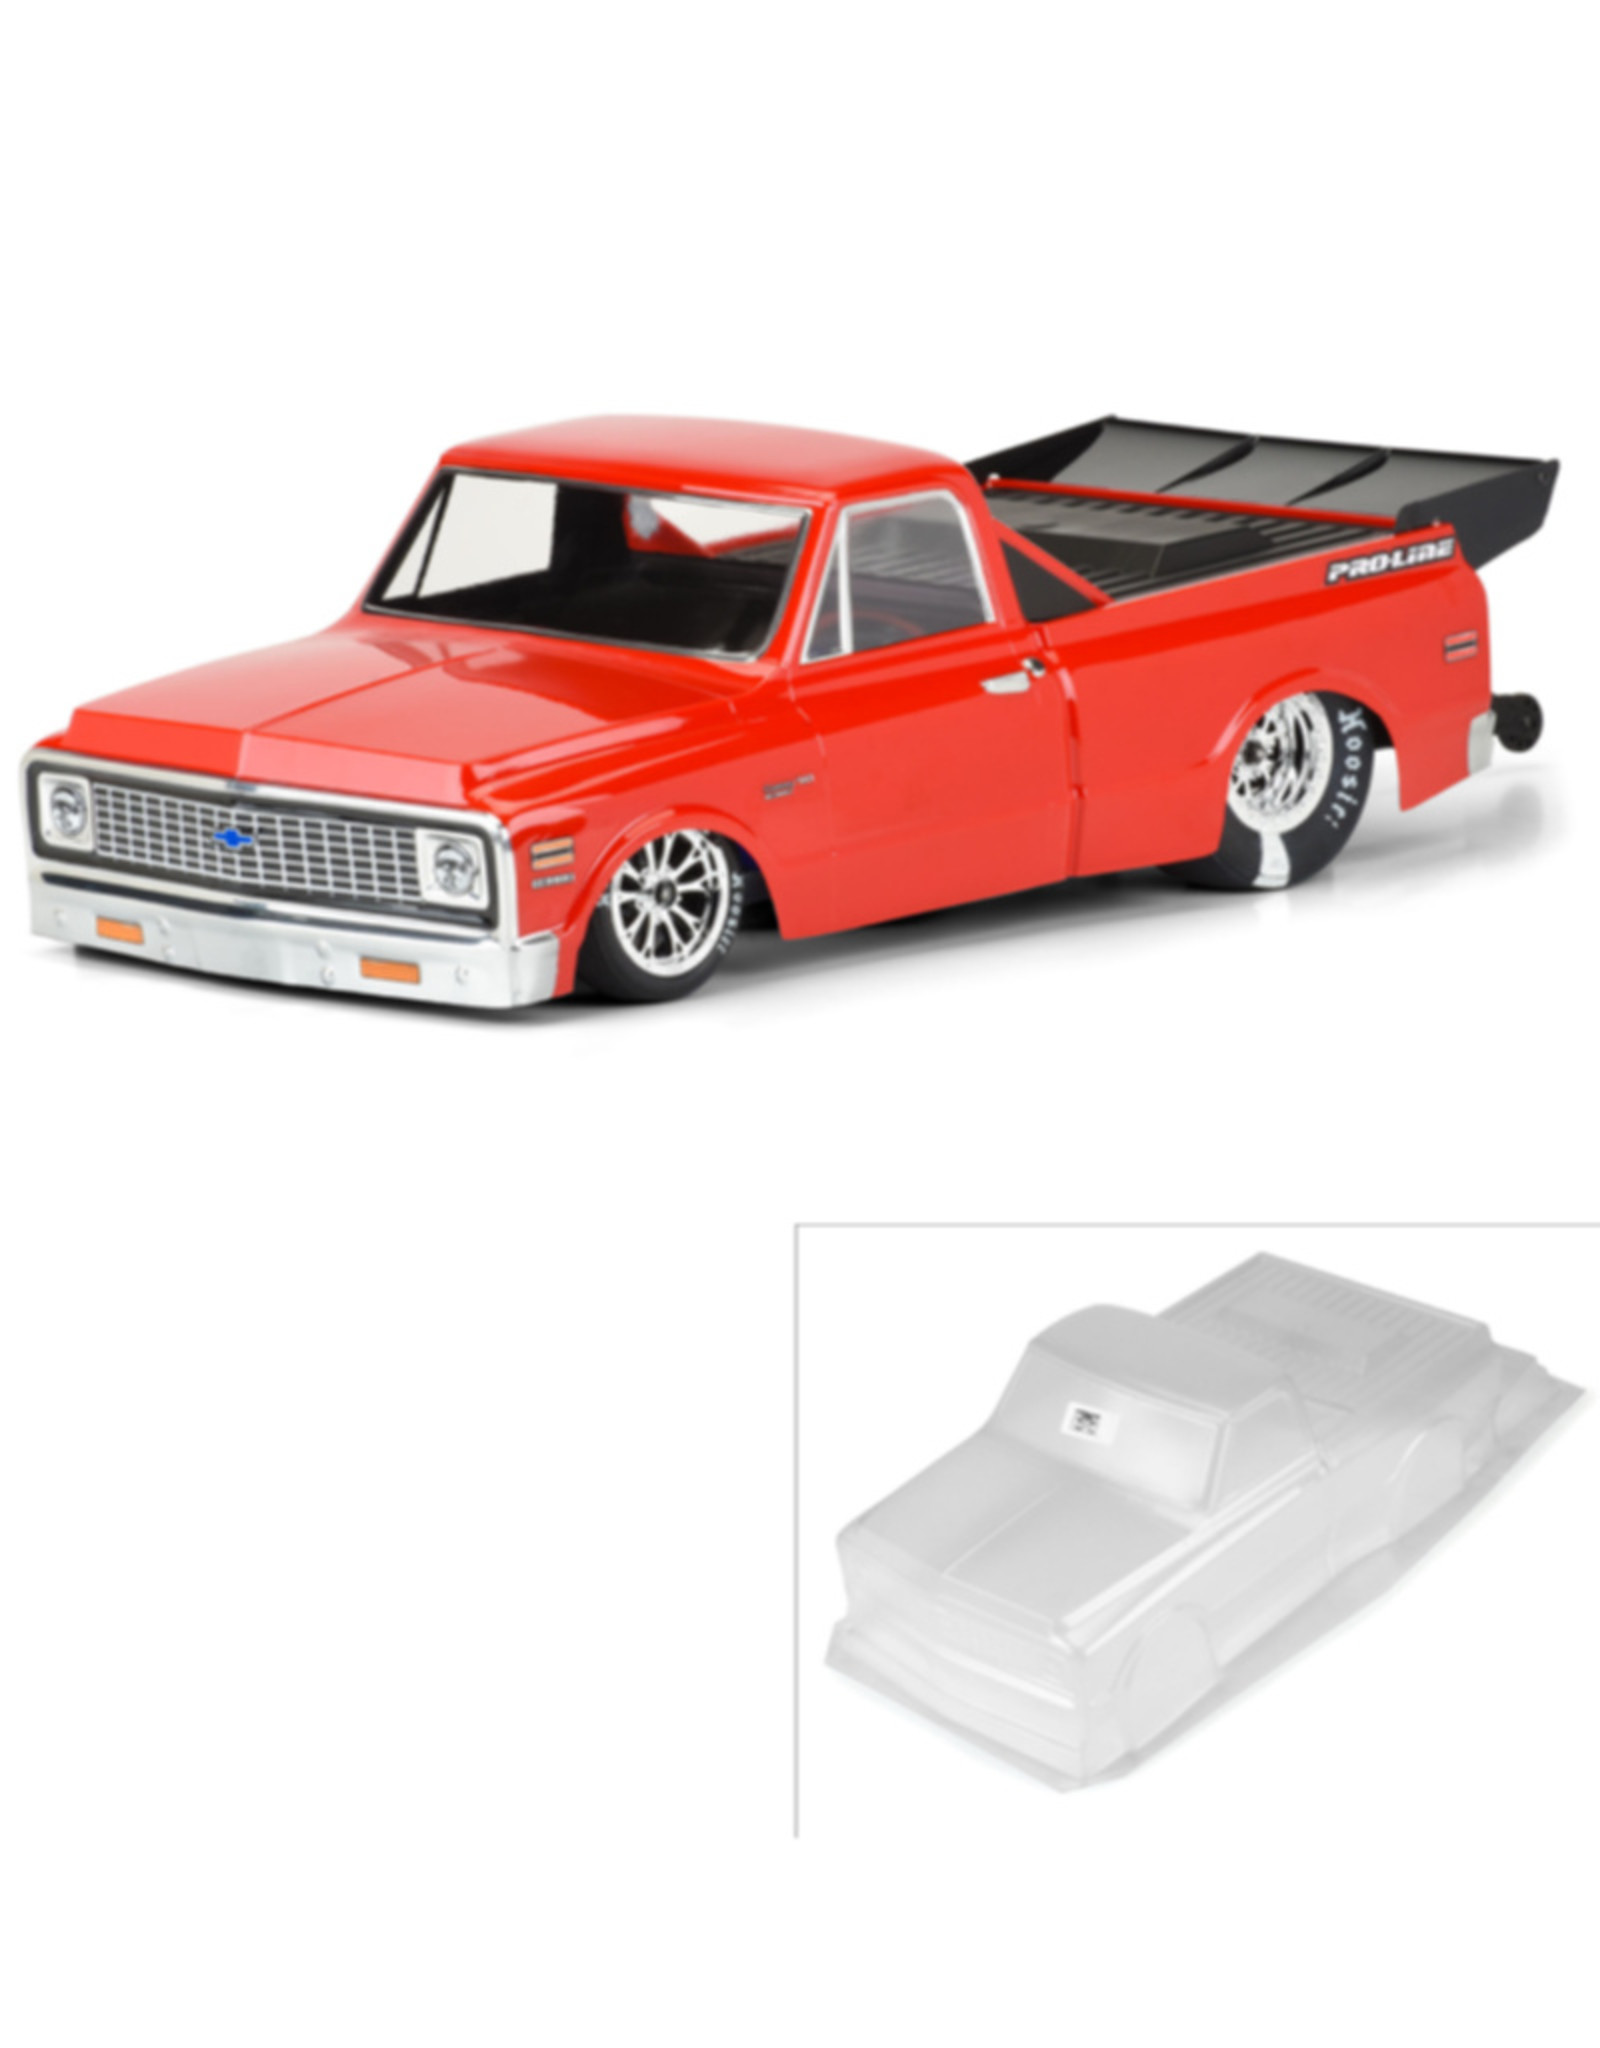 Pro-Line Racing PRO355700		1972 Chevy C-10 Clear Body